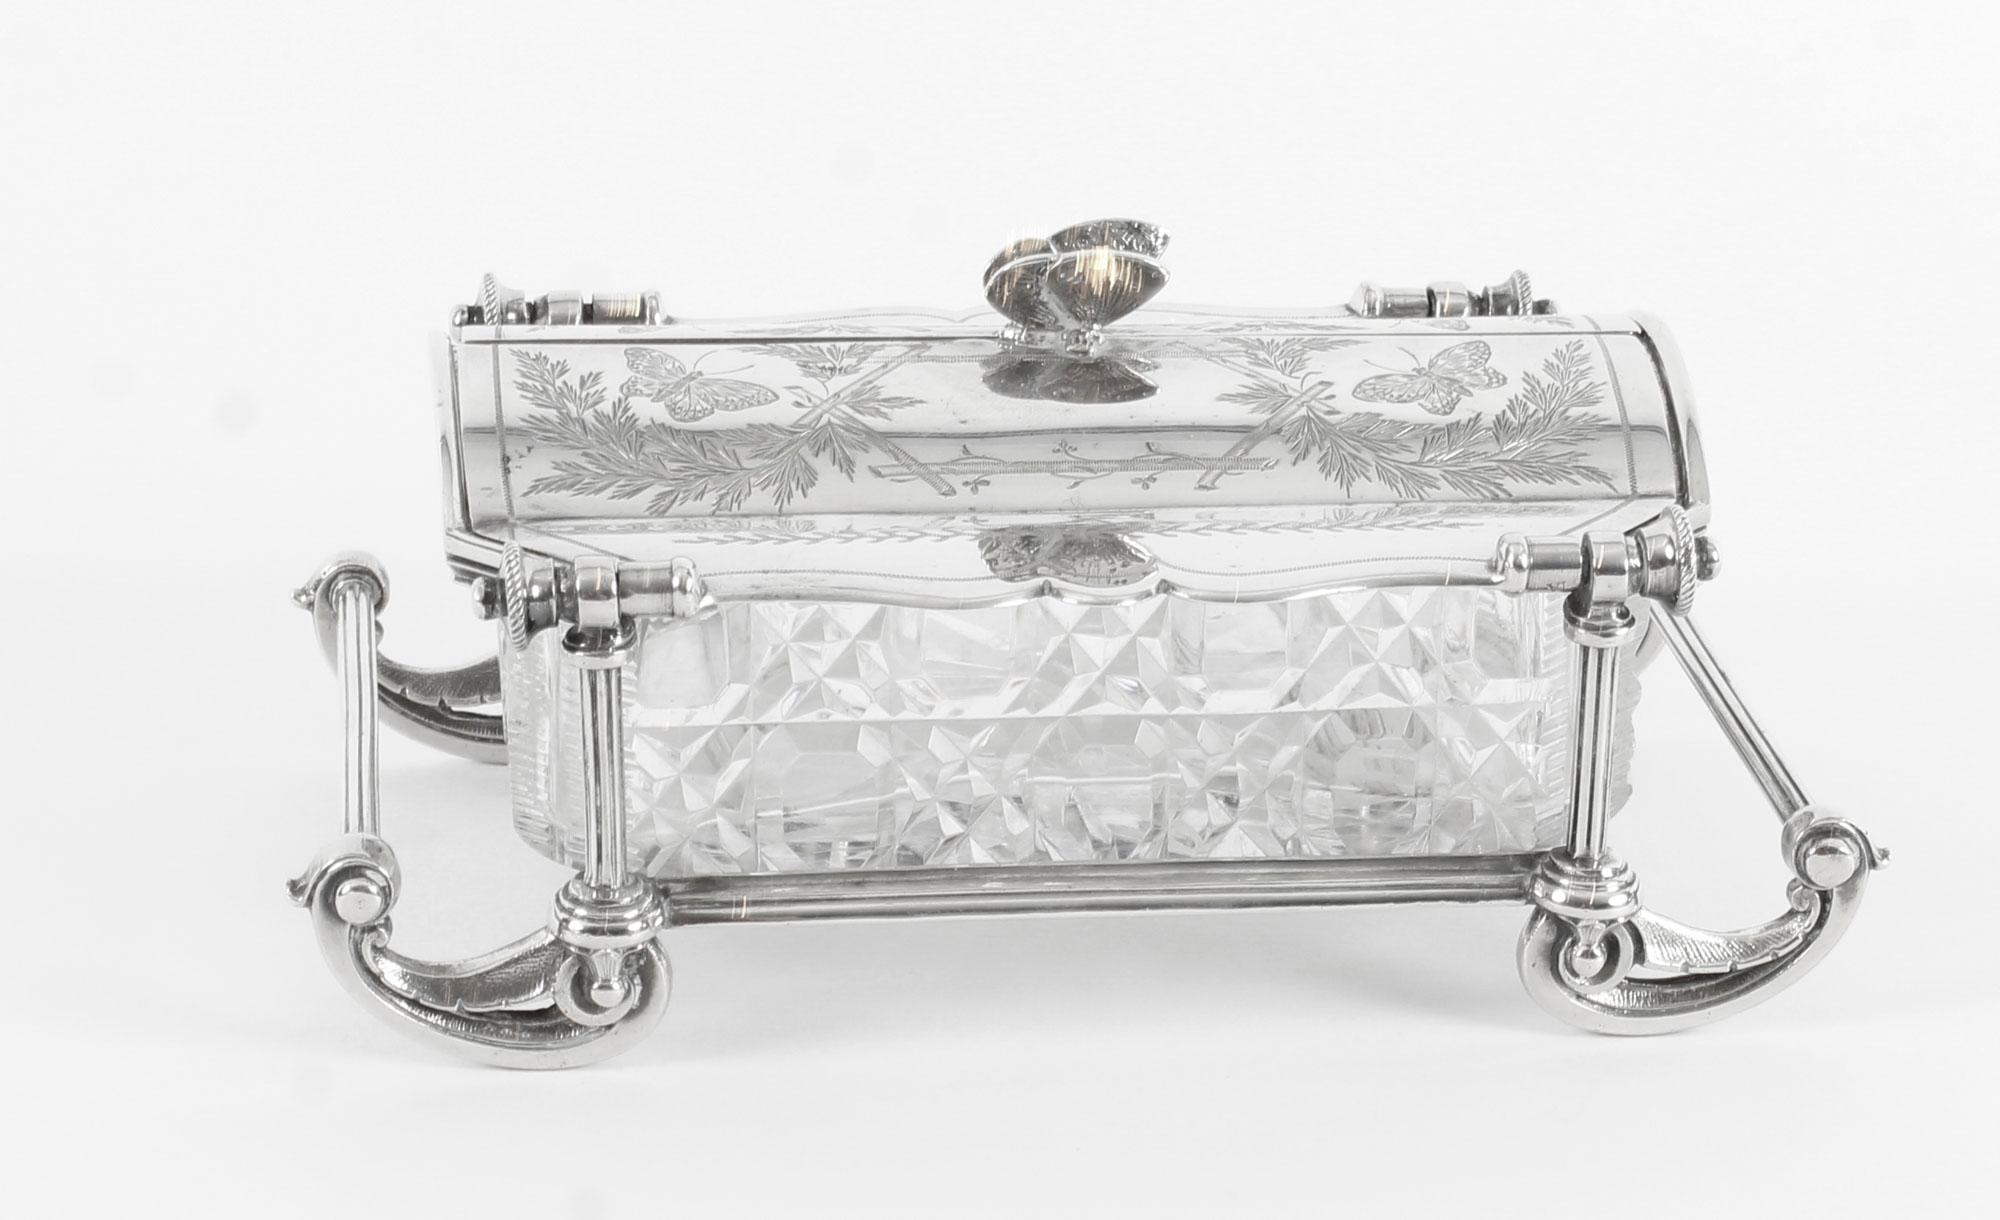 This is a fine antique English Victorian silver plated and cut glass butter dish, with the maker's mark of the renowned silversmith and retailer, Elkington & Co and a date stamp for 1890.

The two door lift up lid is engraved with floral and